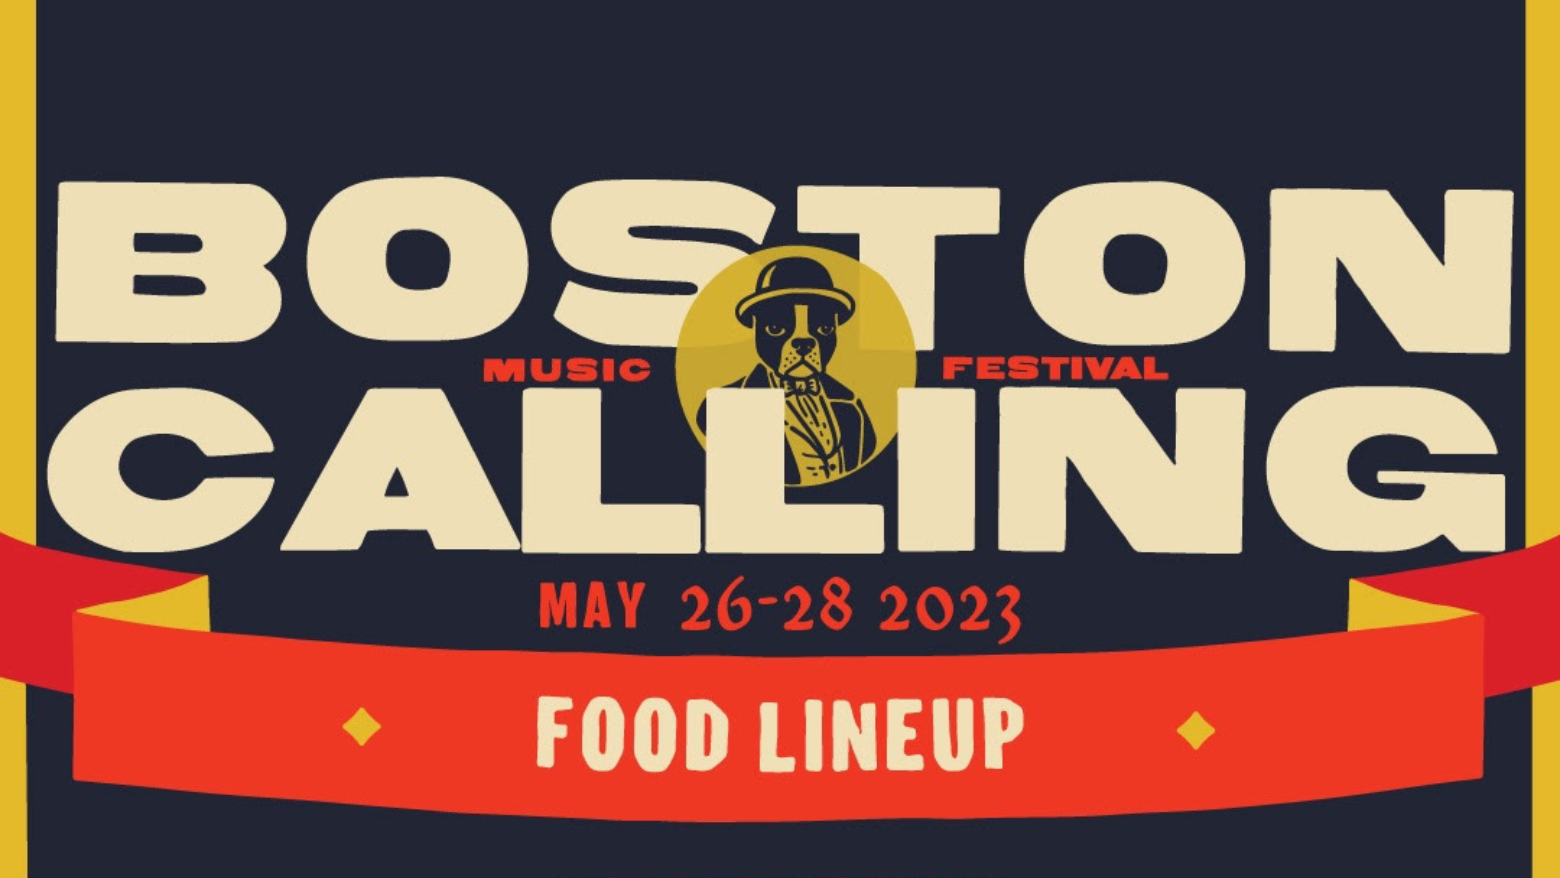 Boston Calling's Culinary Lineup Boston Restaurant News and Events